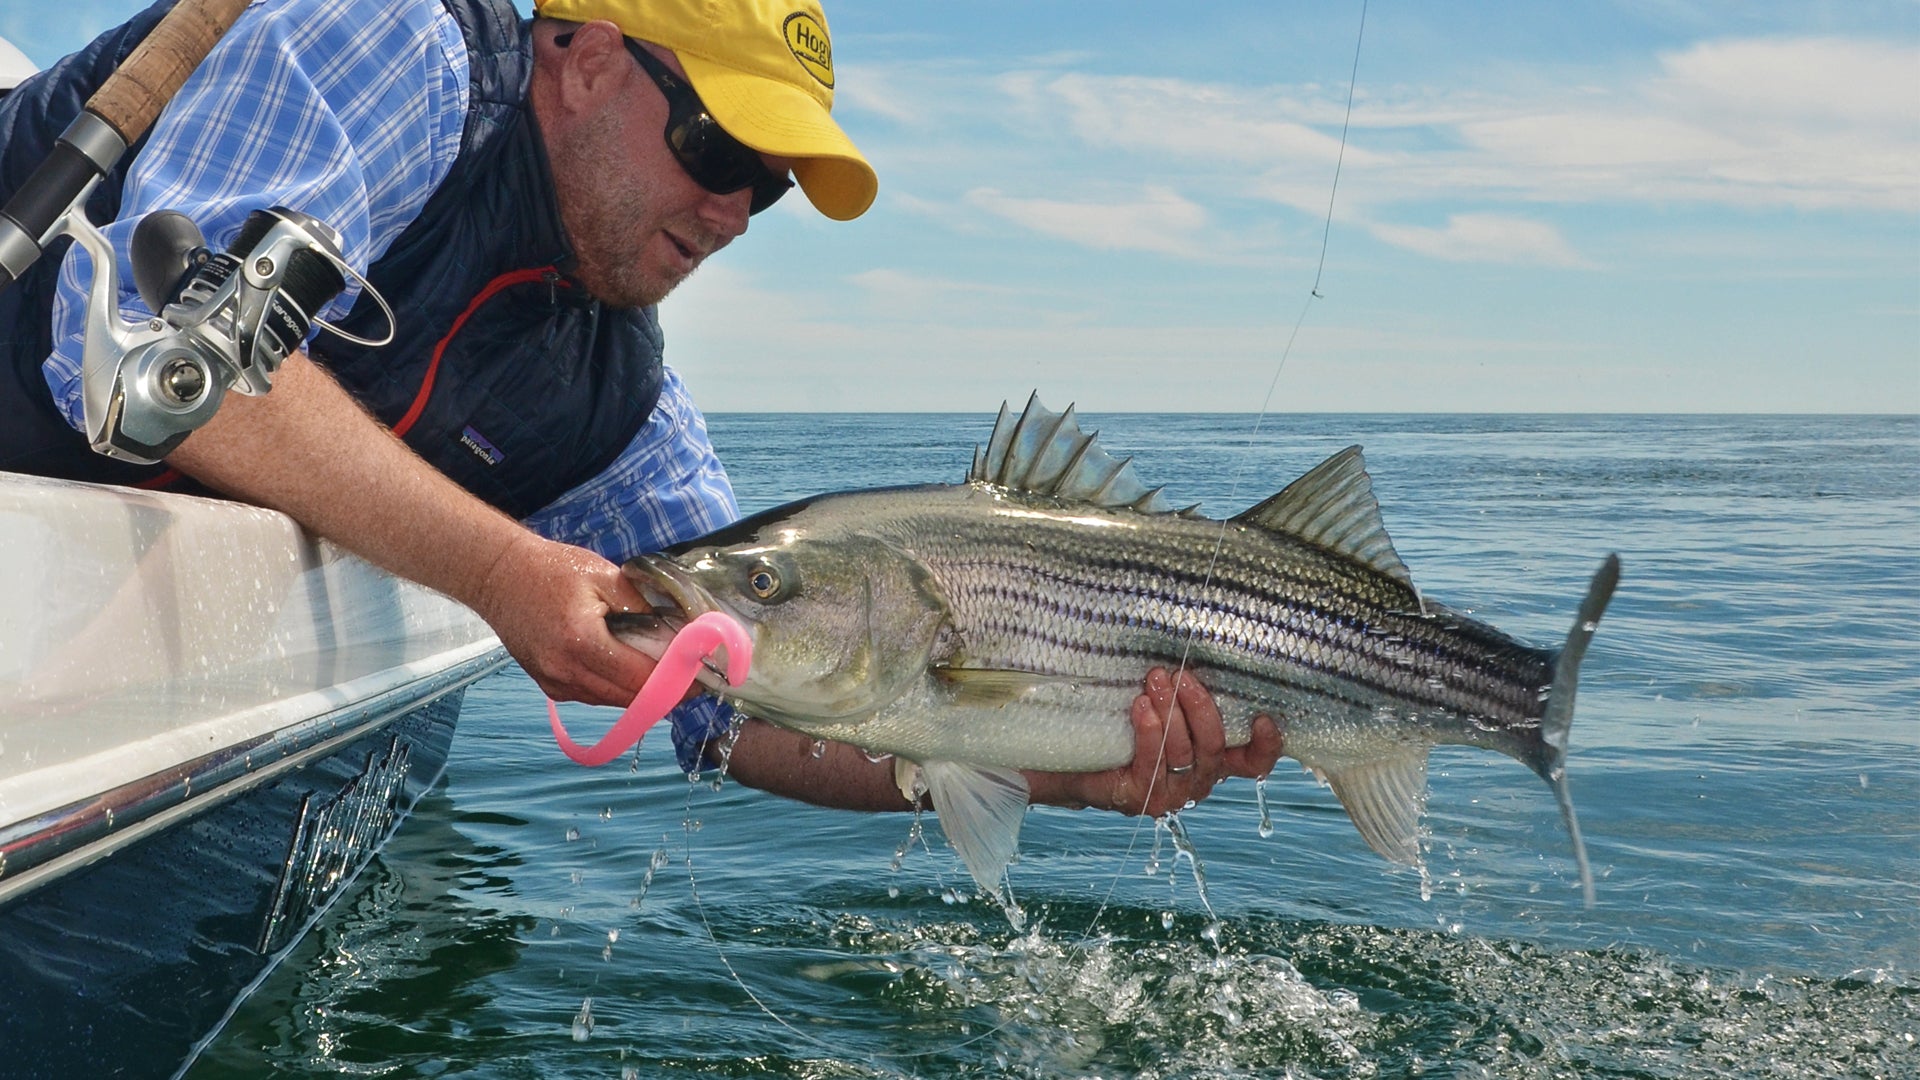 Tackle and Tactics: Rigging Soft Plastics for Striped Bass